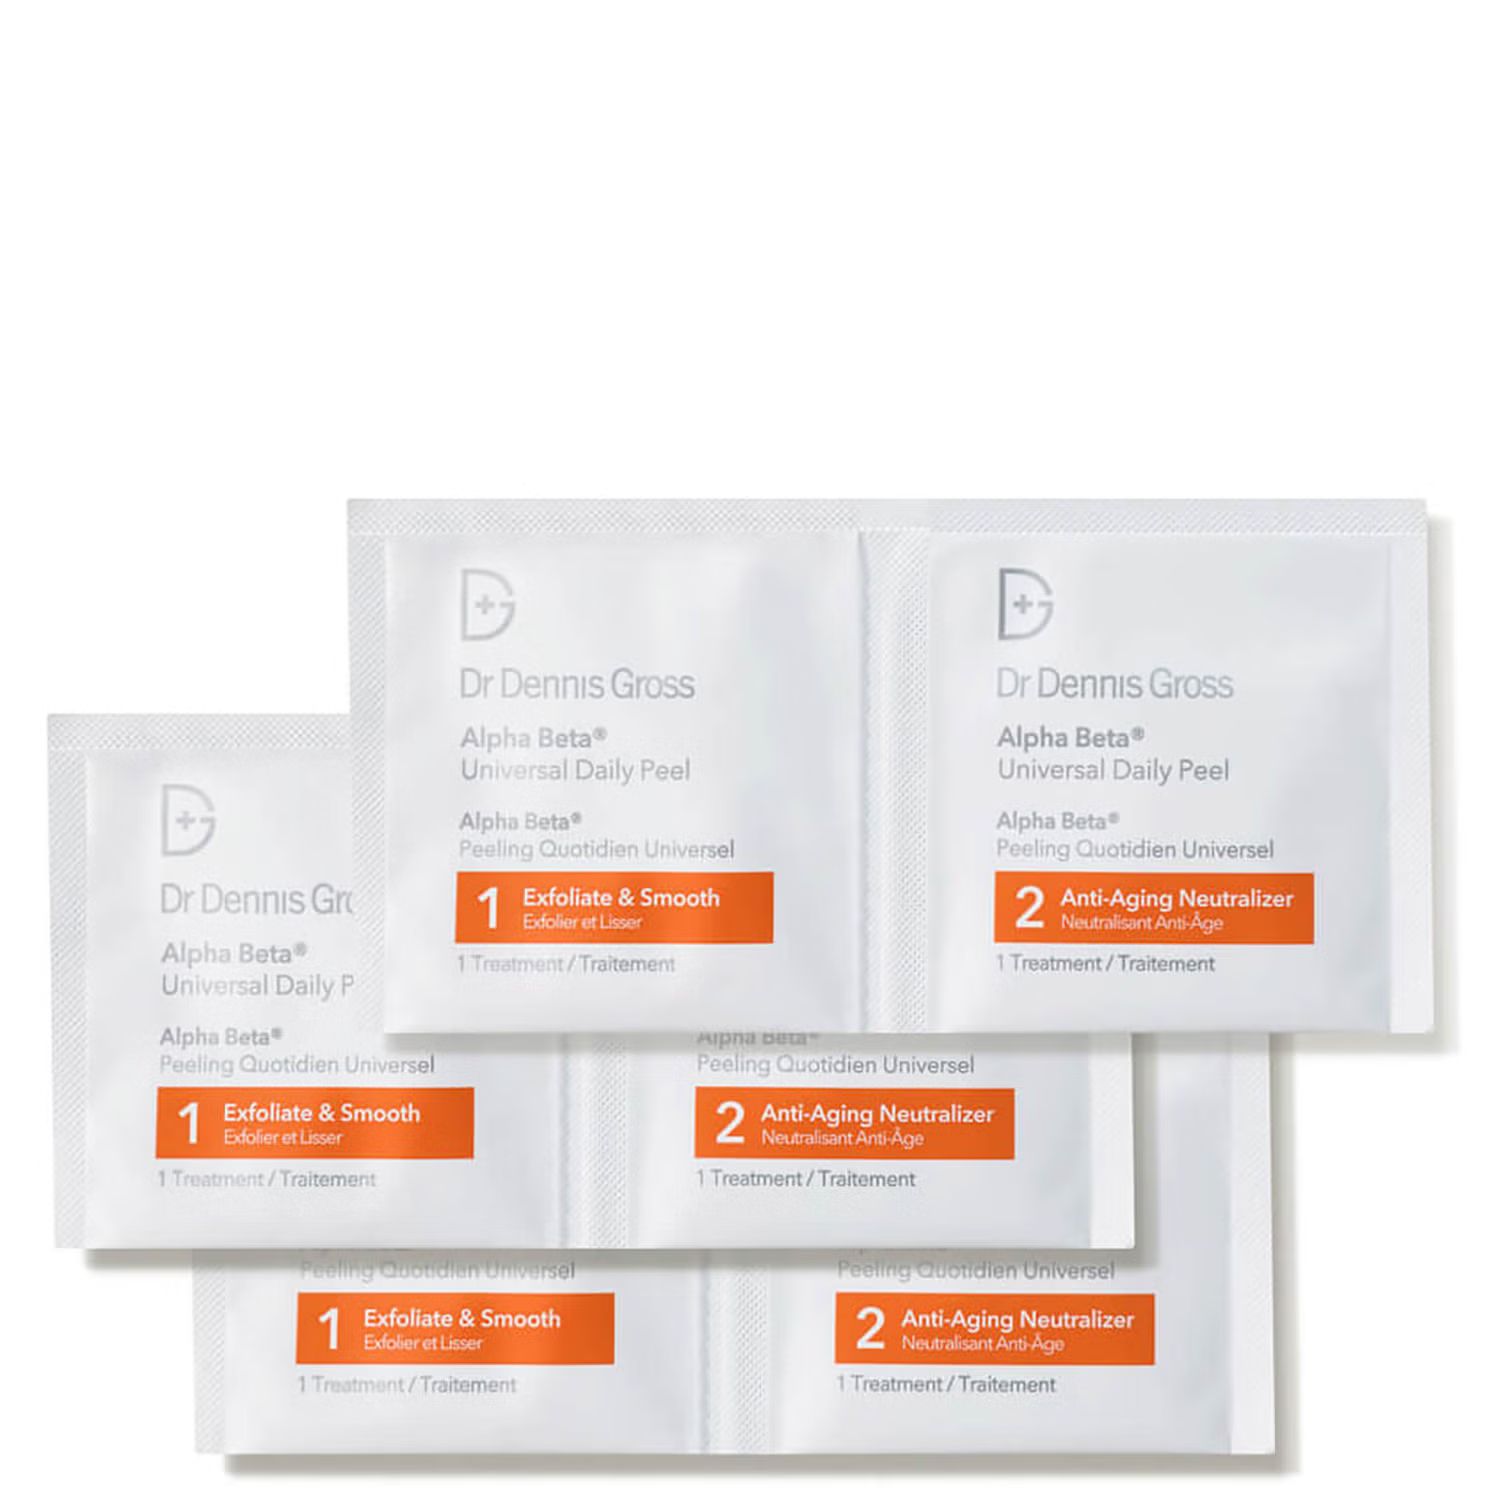 Dr Dennis Gross Alpha Beta Universal Daily Peel - Packettes (30 count) | Dermstore